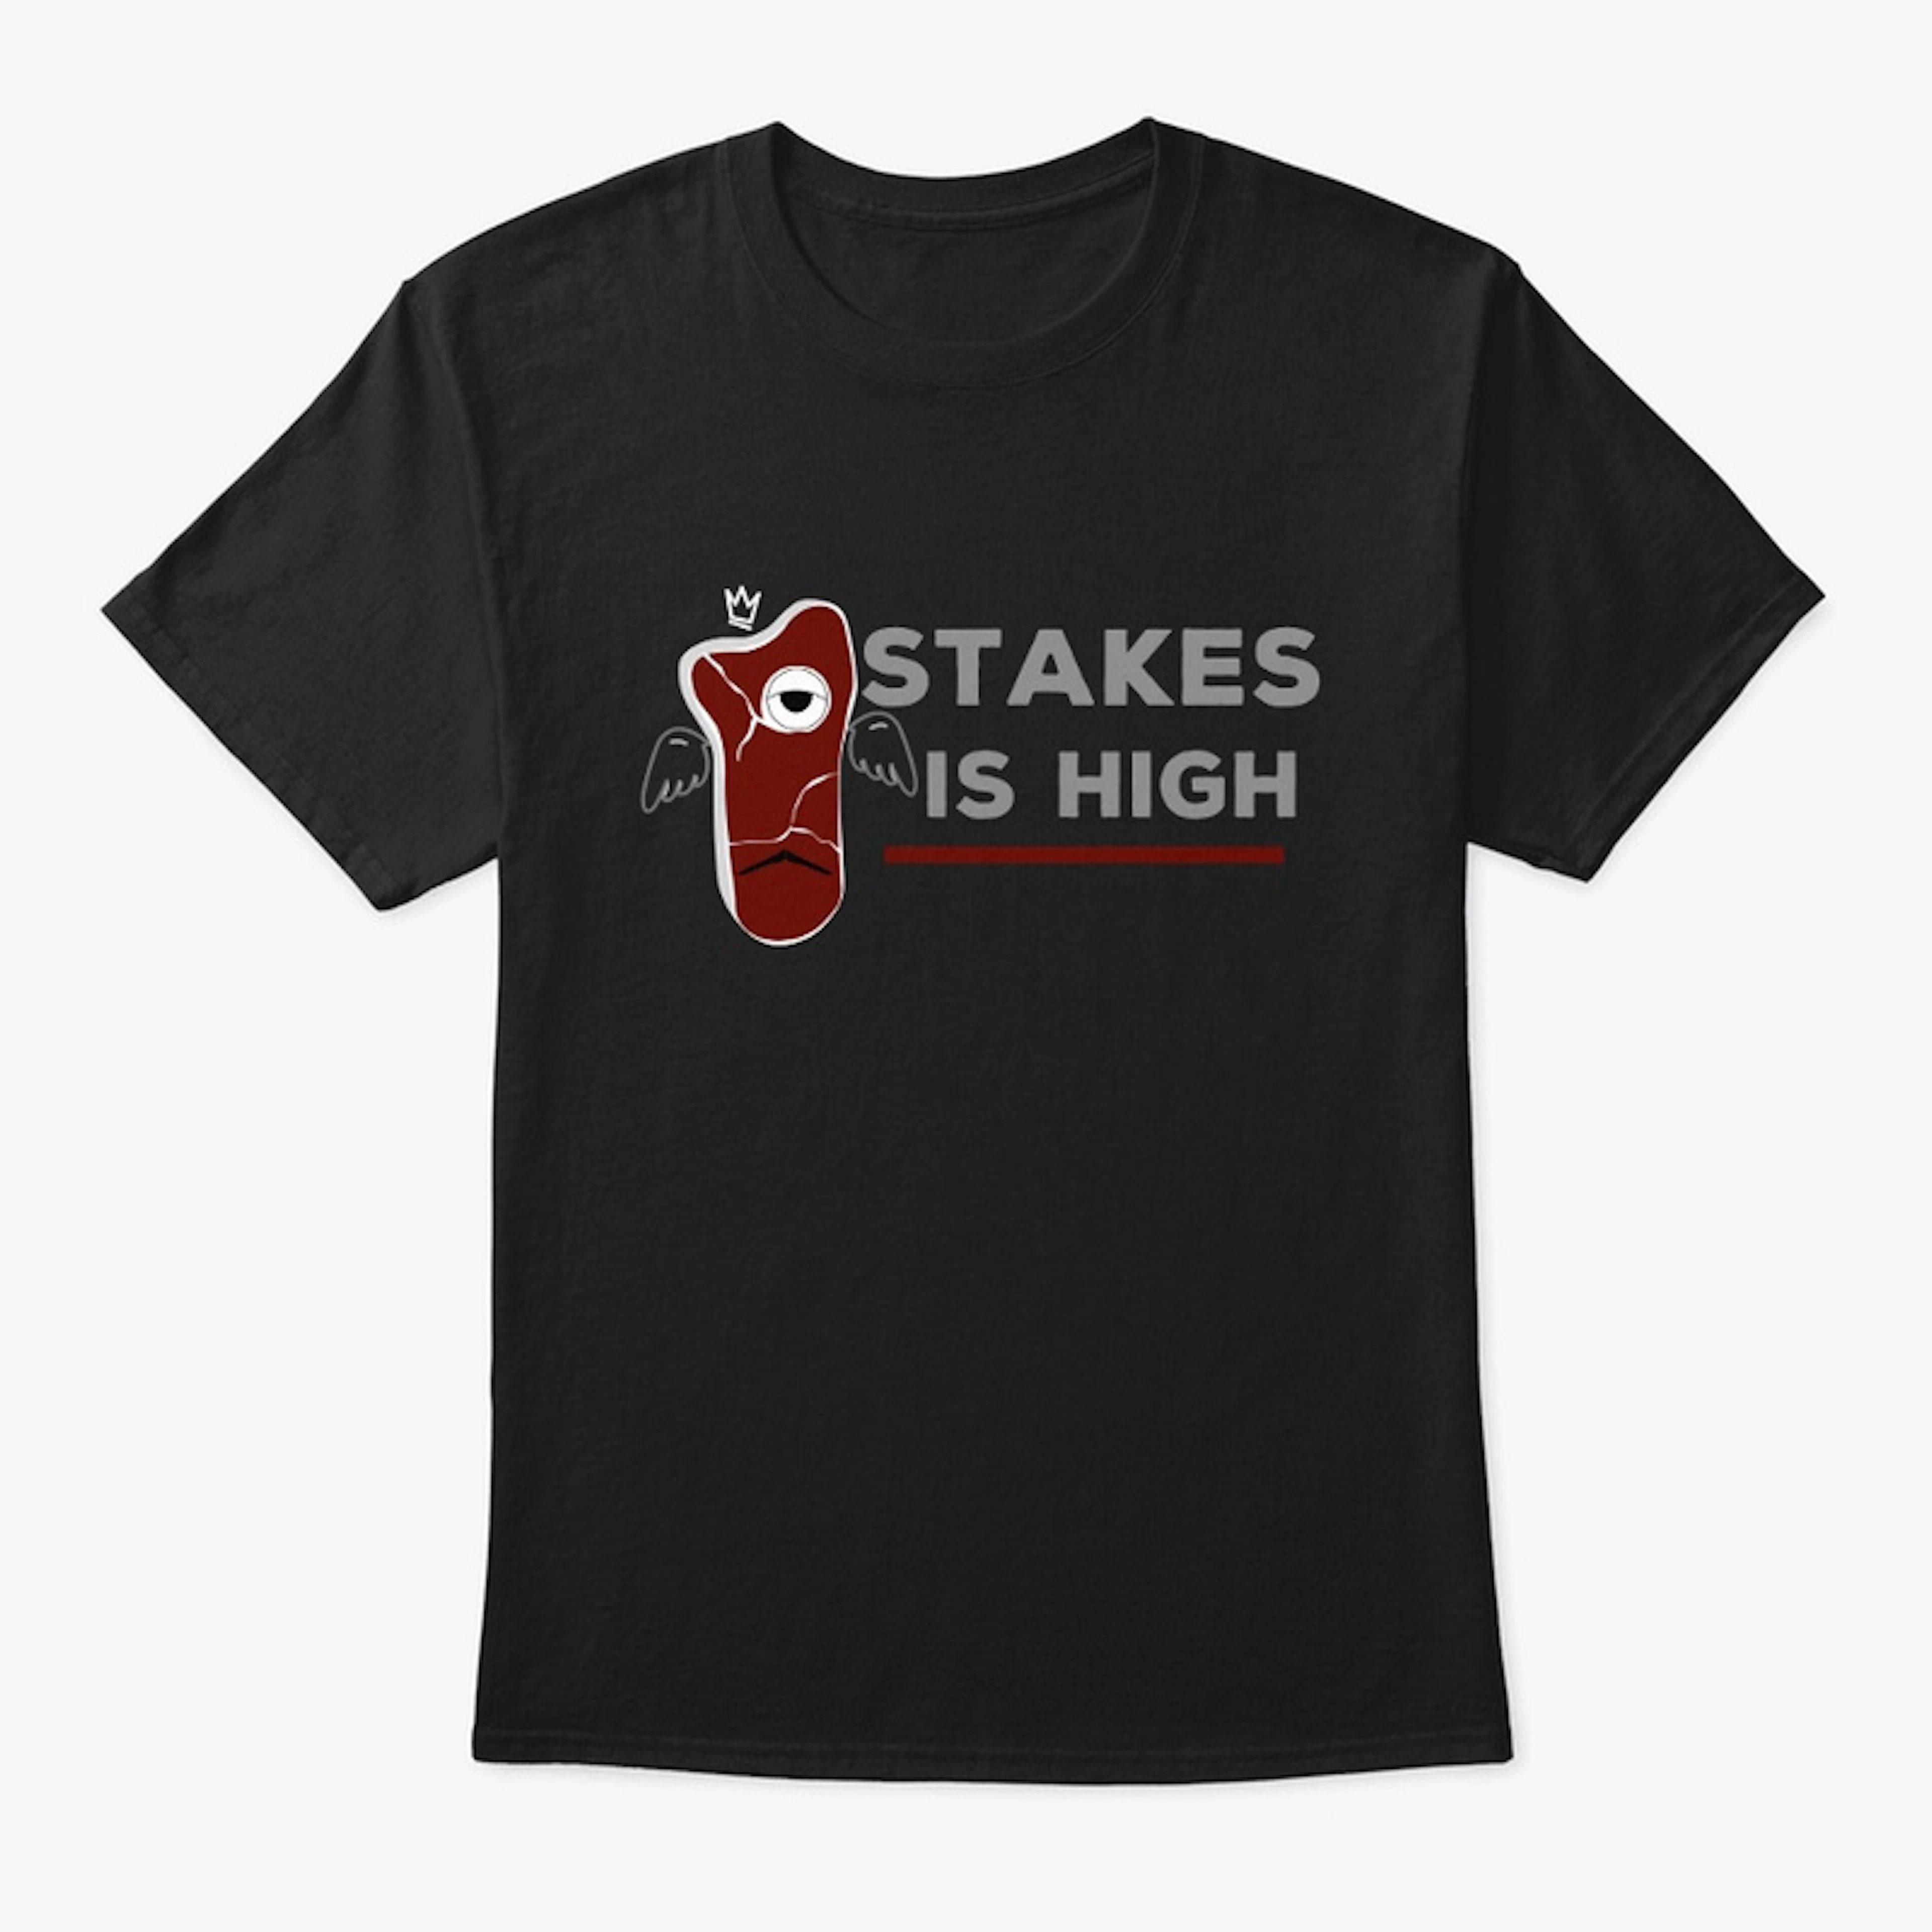 Stakes is High Tee